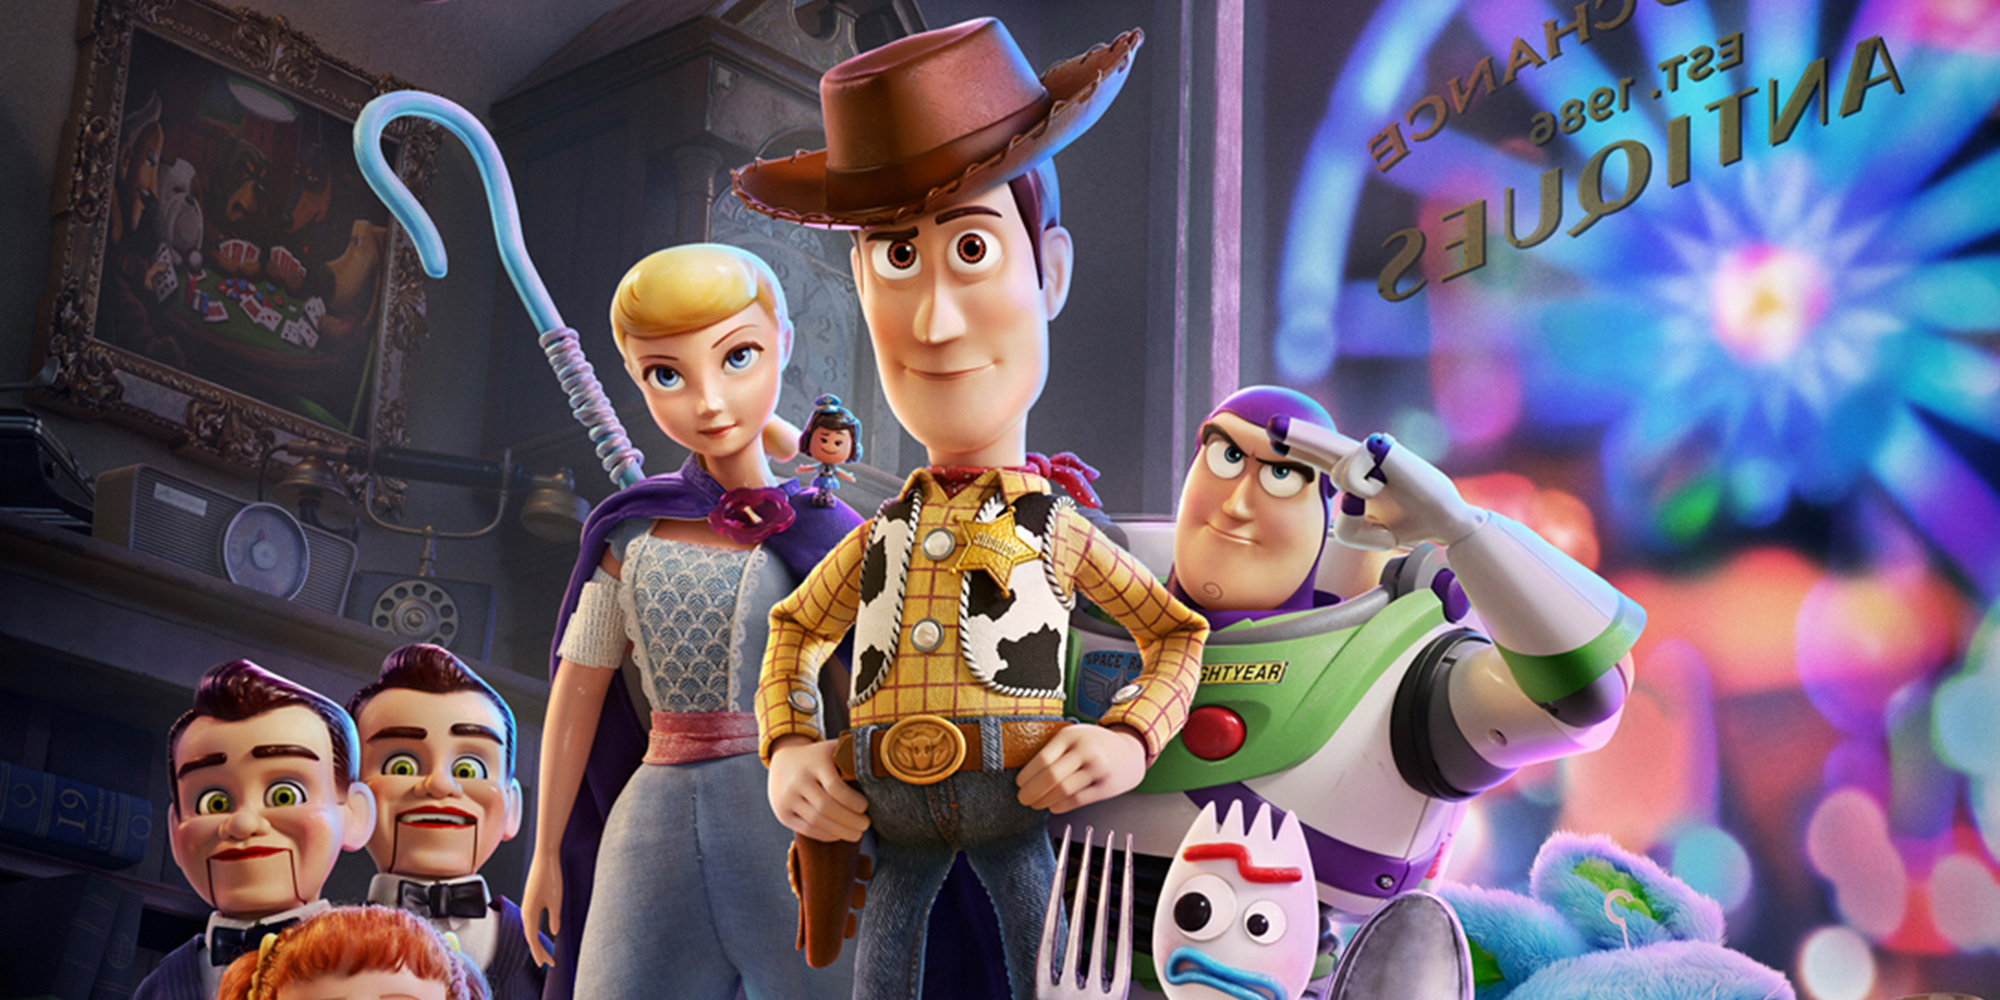  Une bande-annonce pour Toy Story 4